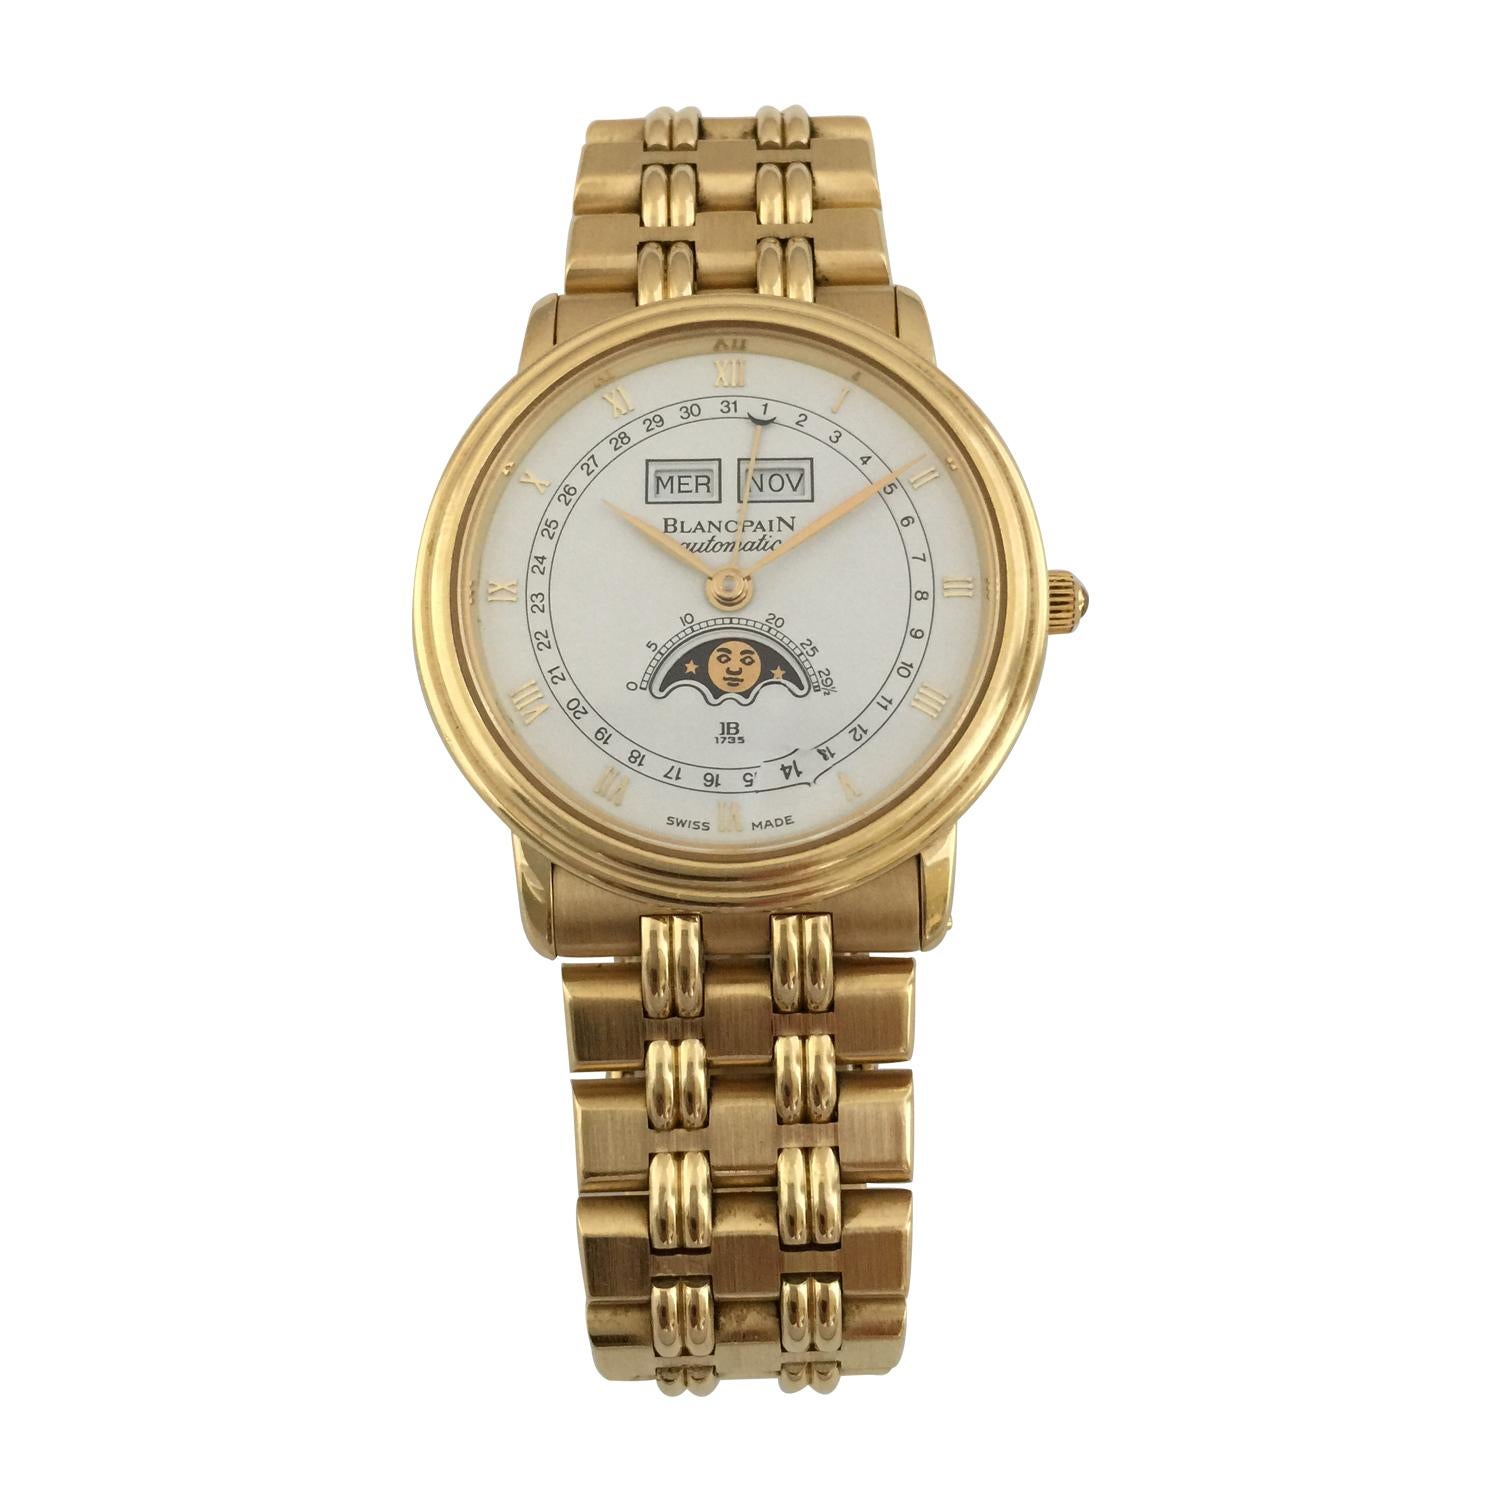 An 18k Yellow Gold Triple Calendar Moonphase Villeret Gents Wristwatch, moonphase aperture displayed at 6 0'clock, weekday and month displayed at 12 0'clock, inner date calendar chapter, centre calendar hand with a crescent tip, a polished 18k